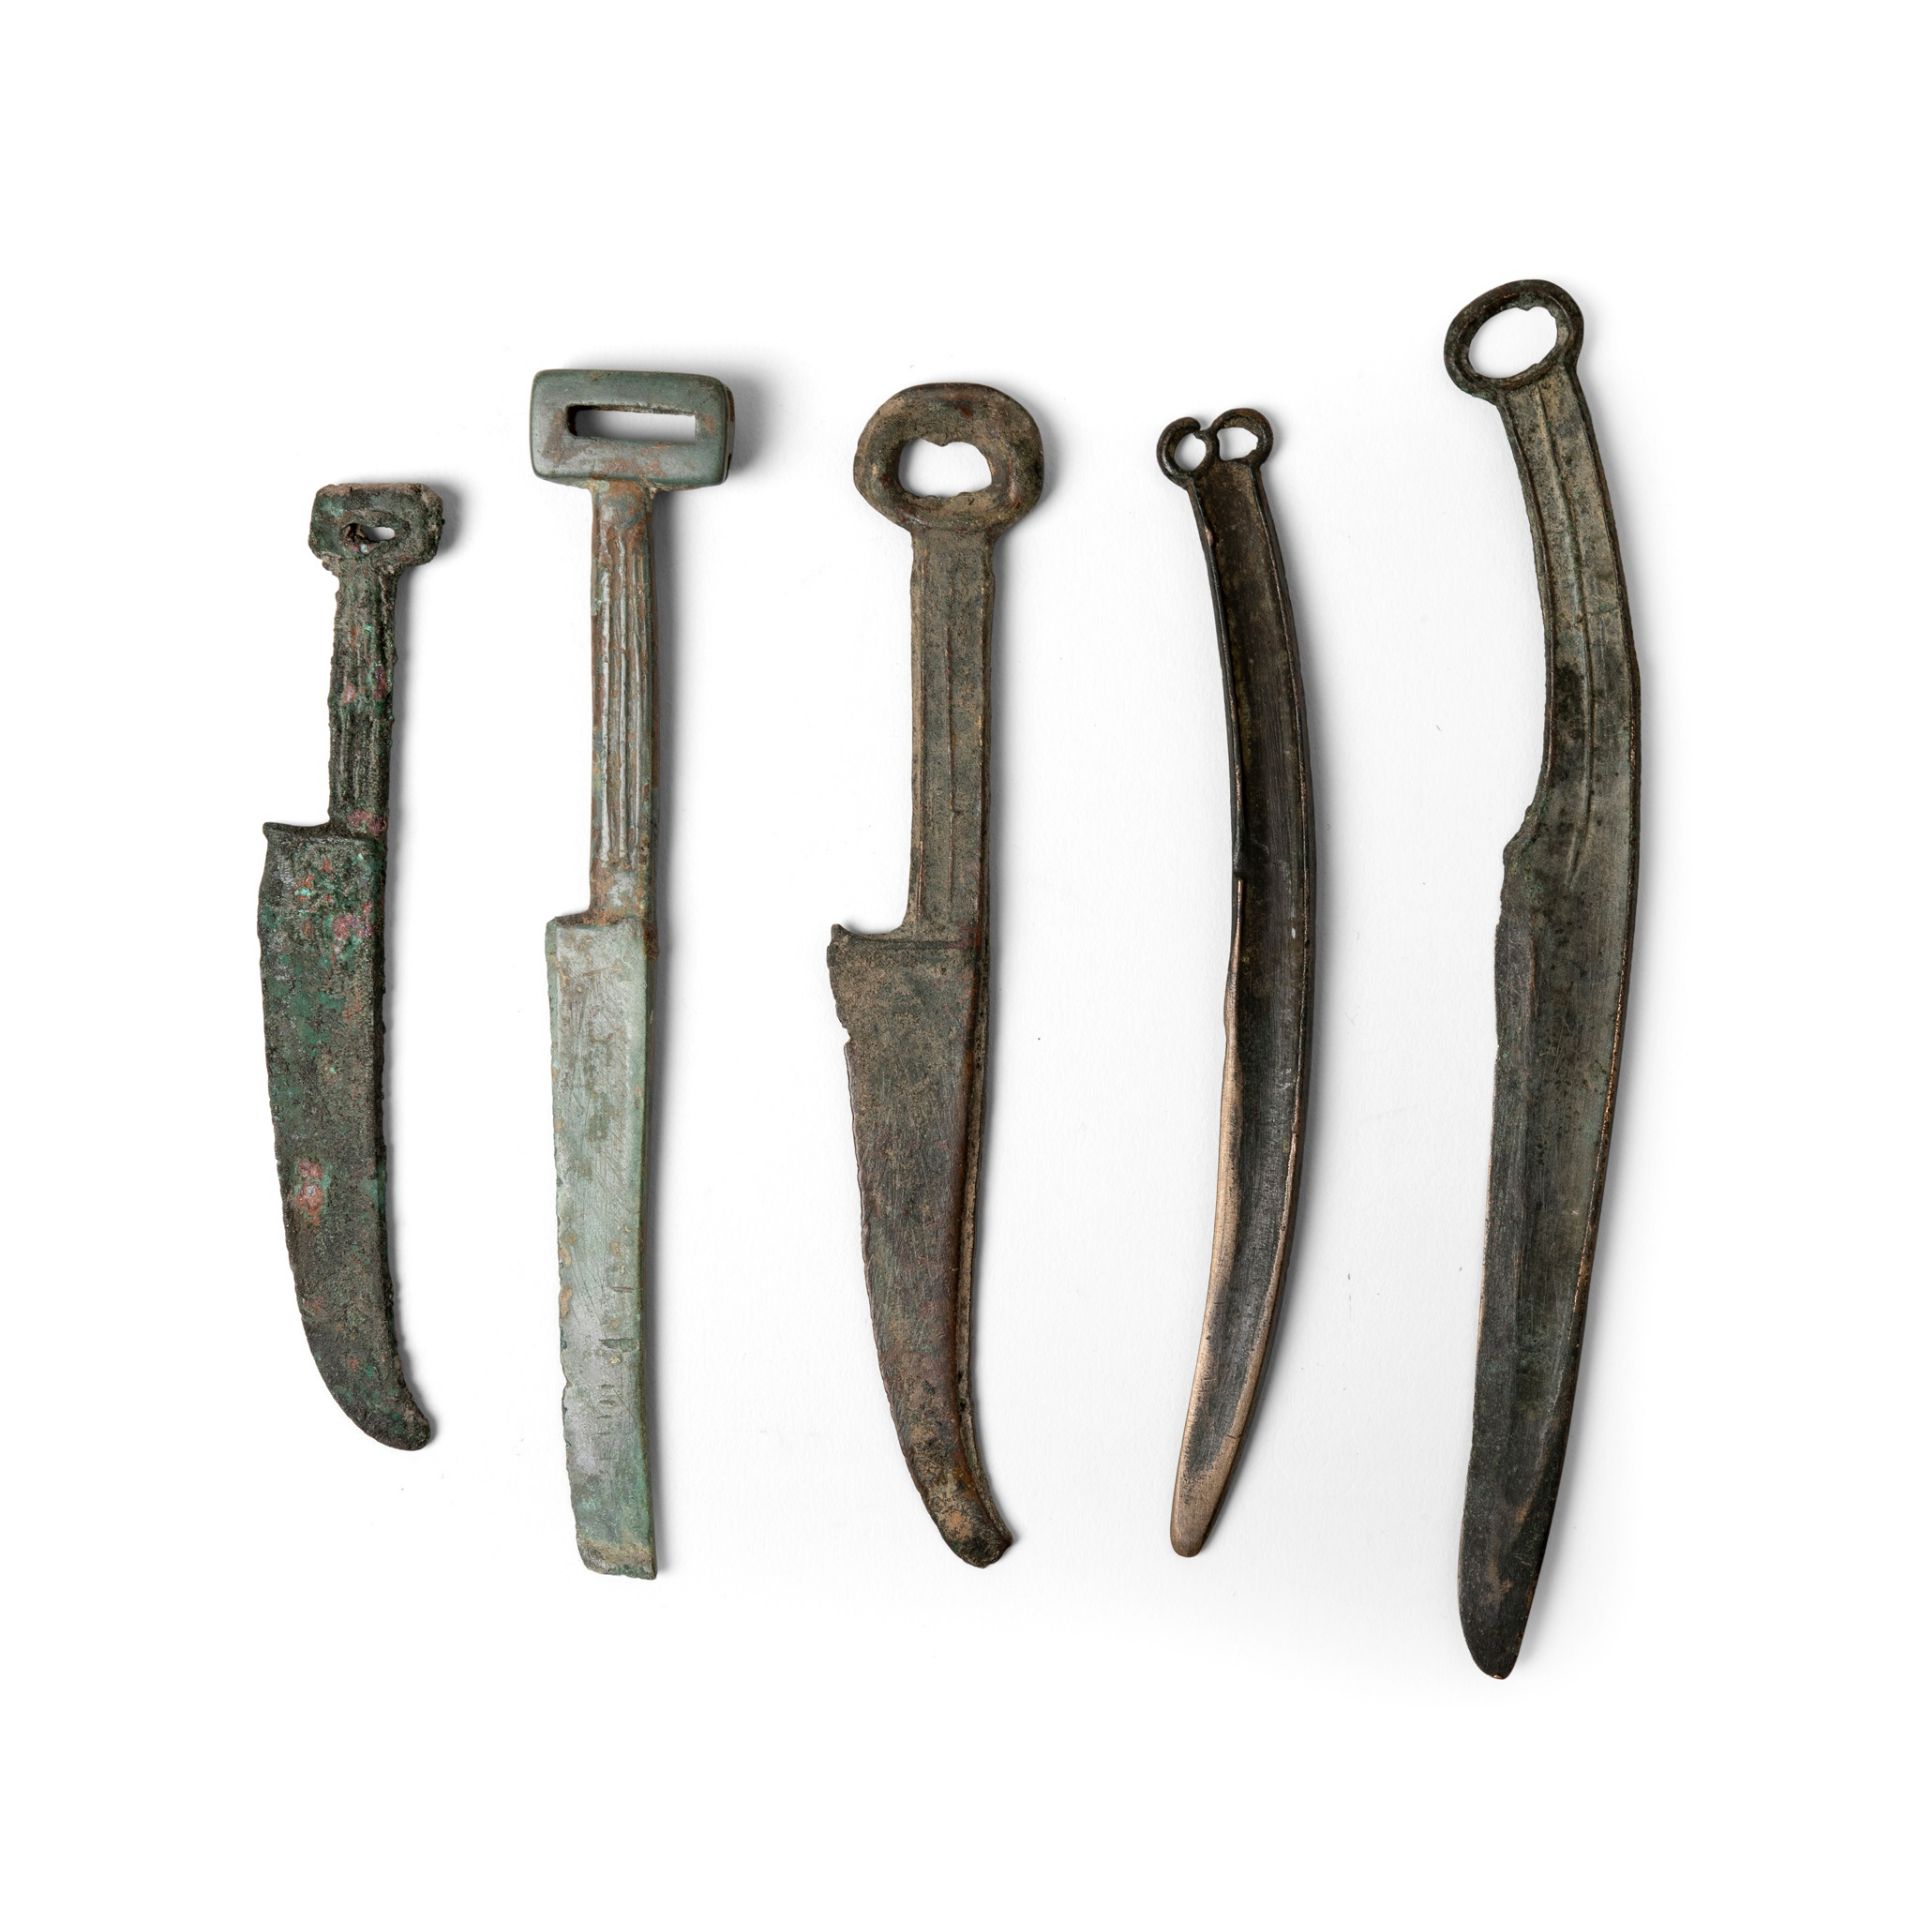 GROUP OF FIVE BRONZE HUNTING KNIVES LATE EASTERN ZHOU DYNASTY, WARRING STATES PERIOD, ORDOS